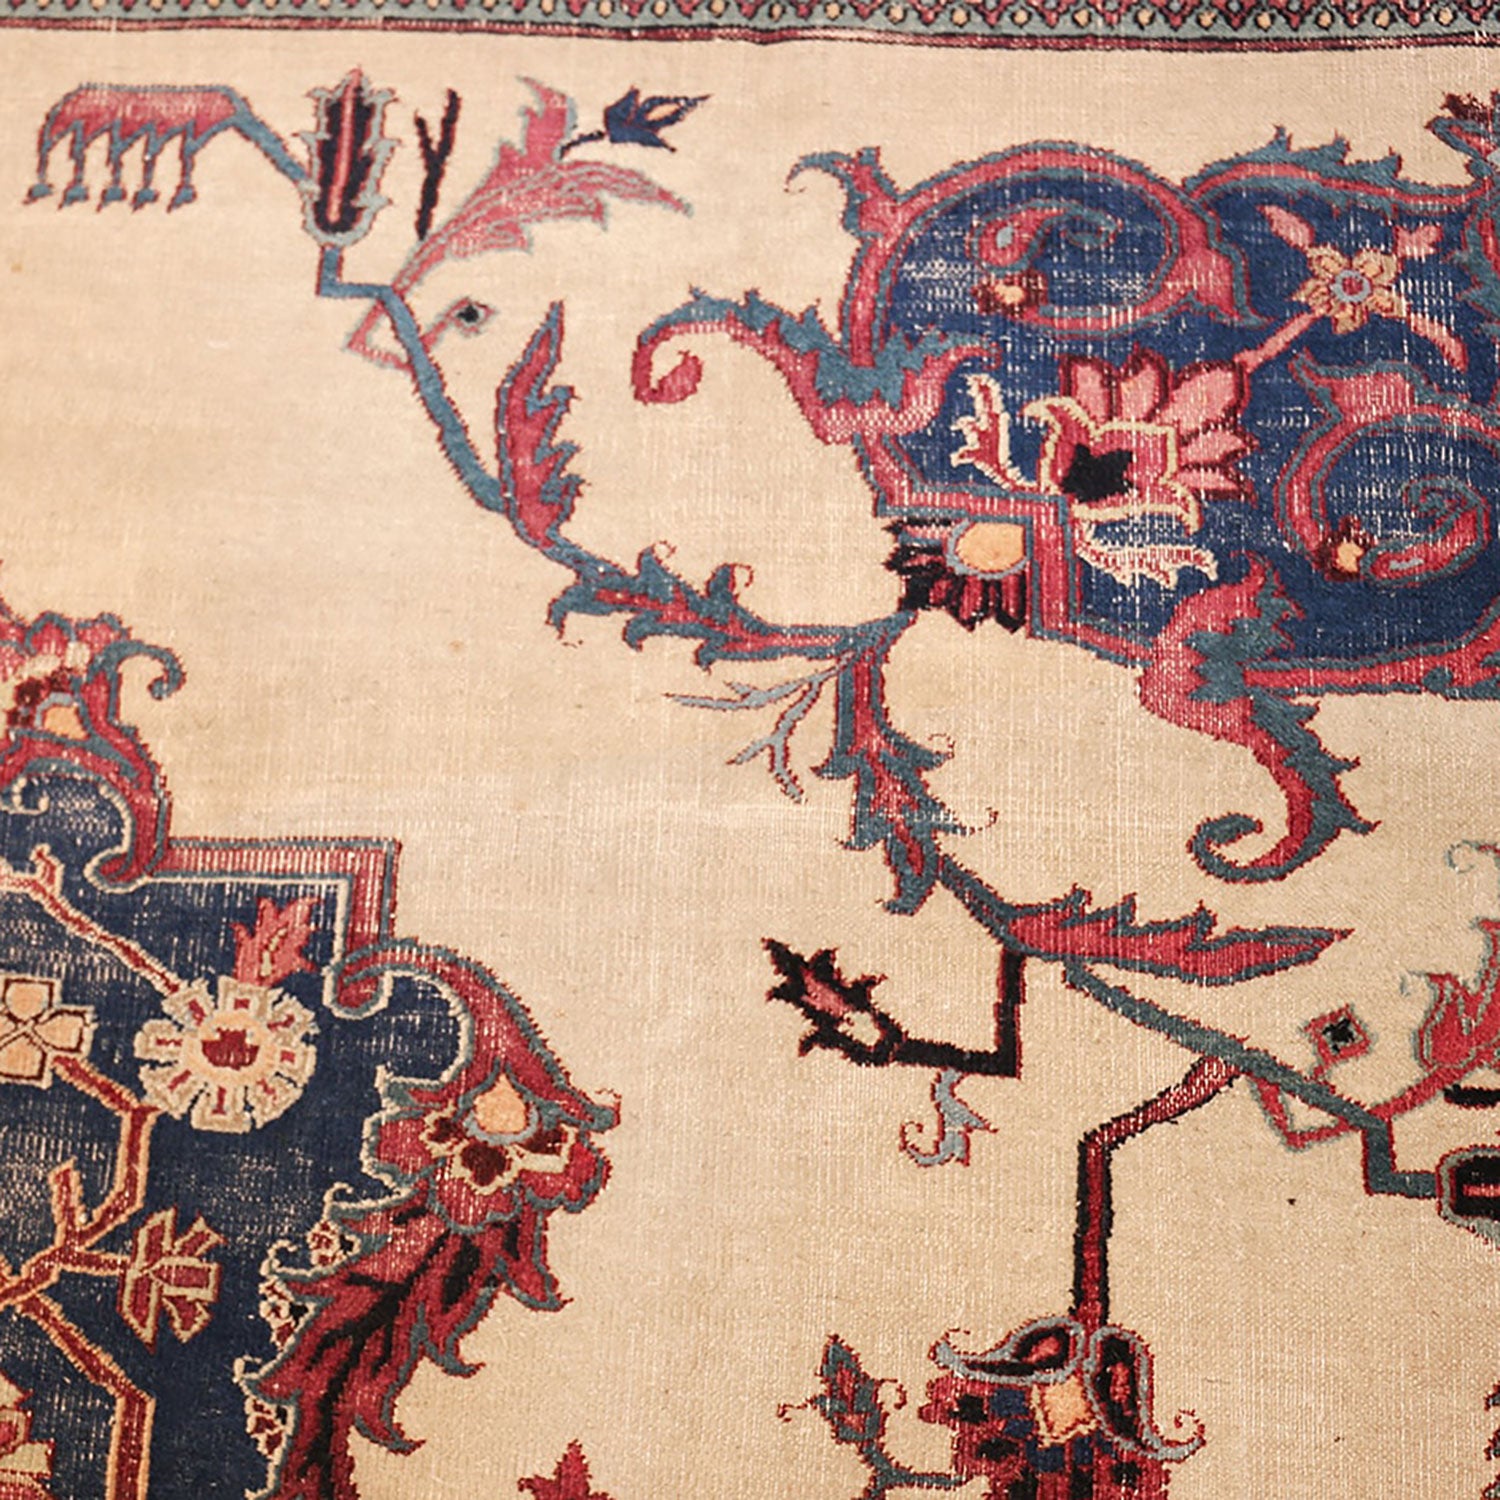 Intricately designed handwoven rug showcases ornate floral motifs and craftsmanship.